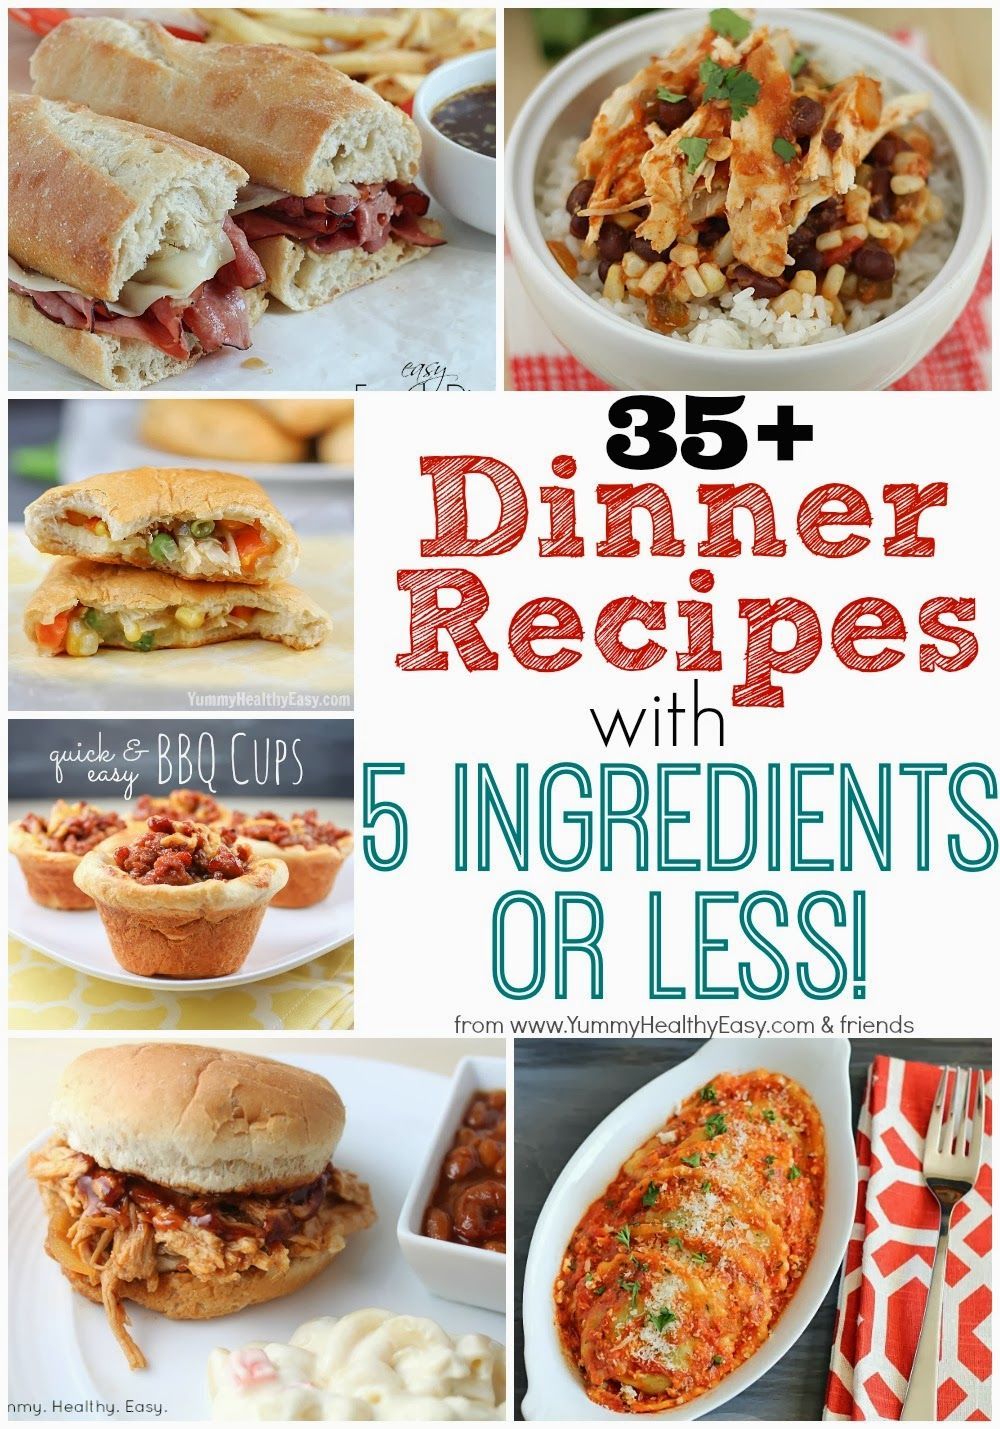 35+ Dinner Recipes with 5 Ingredients or Less! – Yummy Healthy Easy